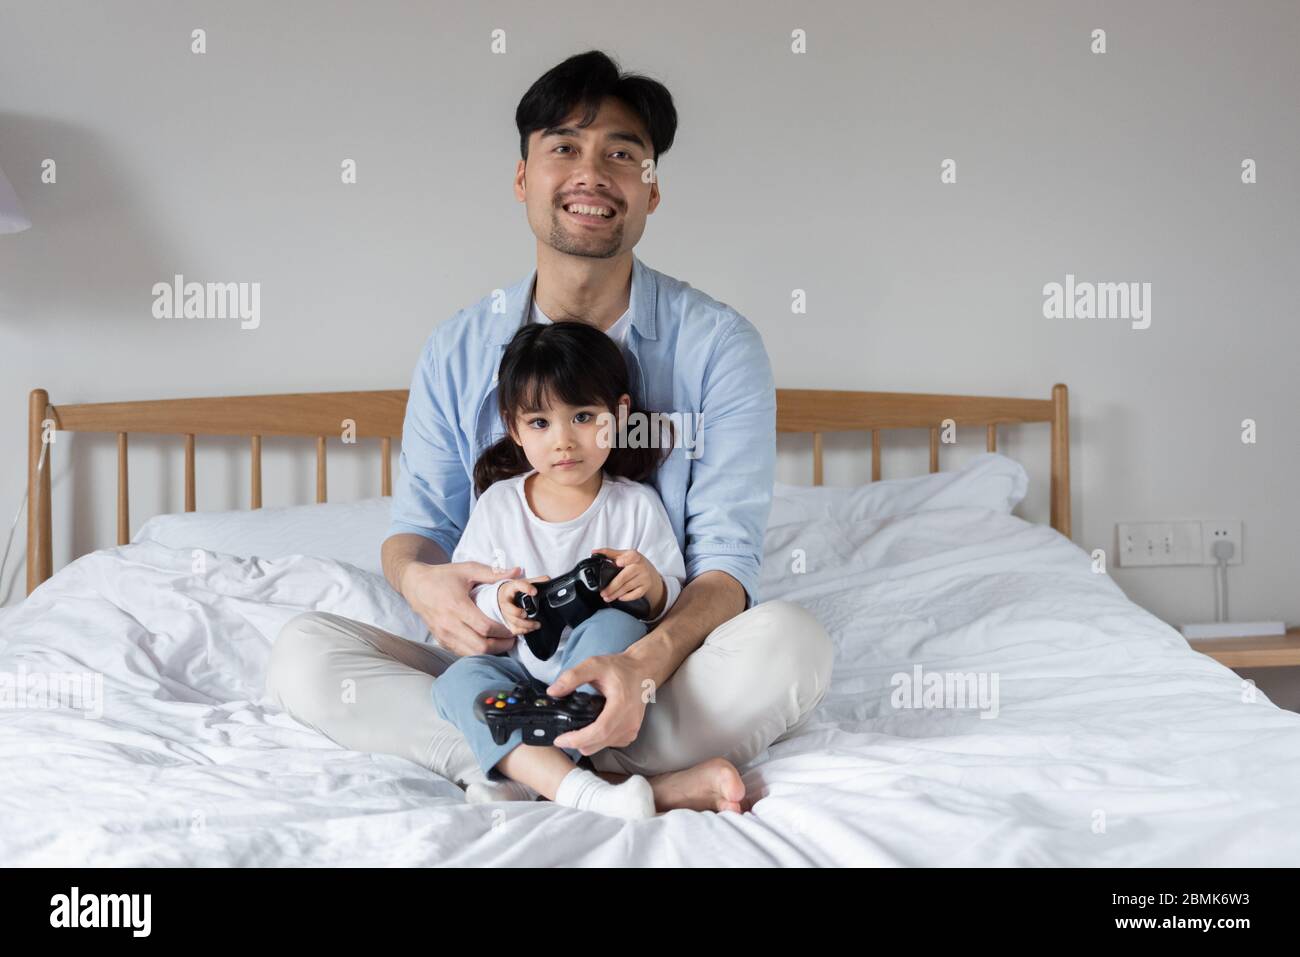 Young Asian dad is playing games on bed with daughter Stock Photo